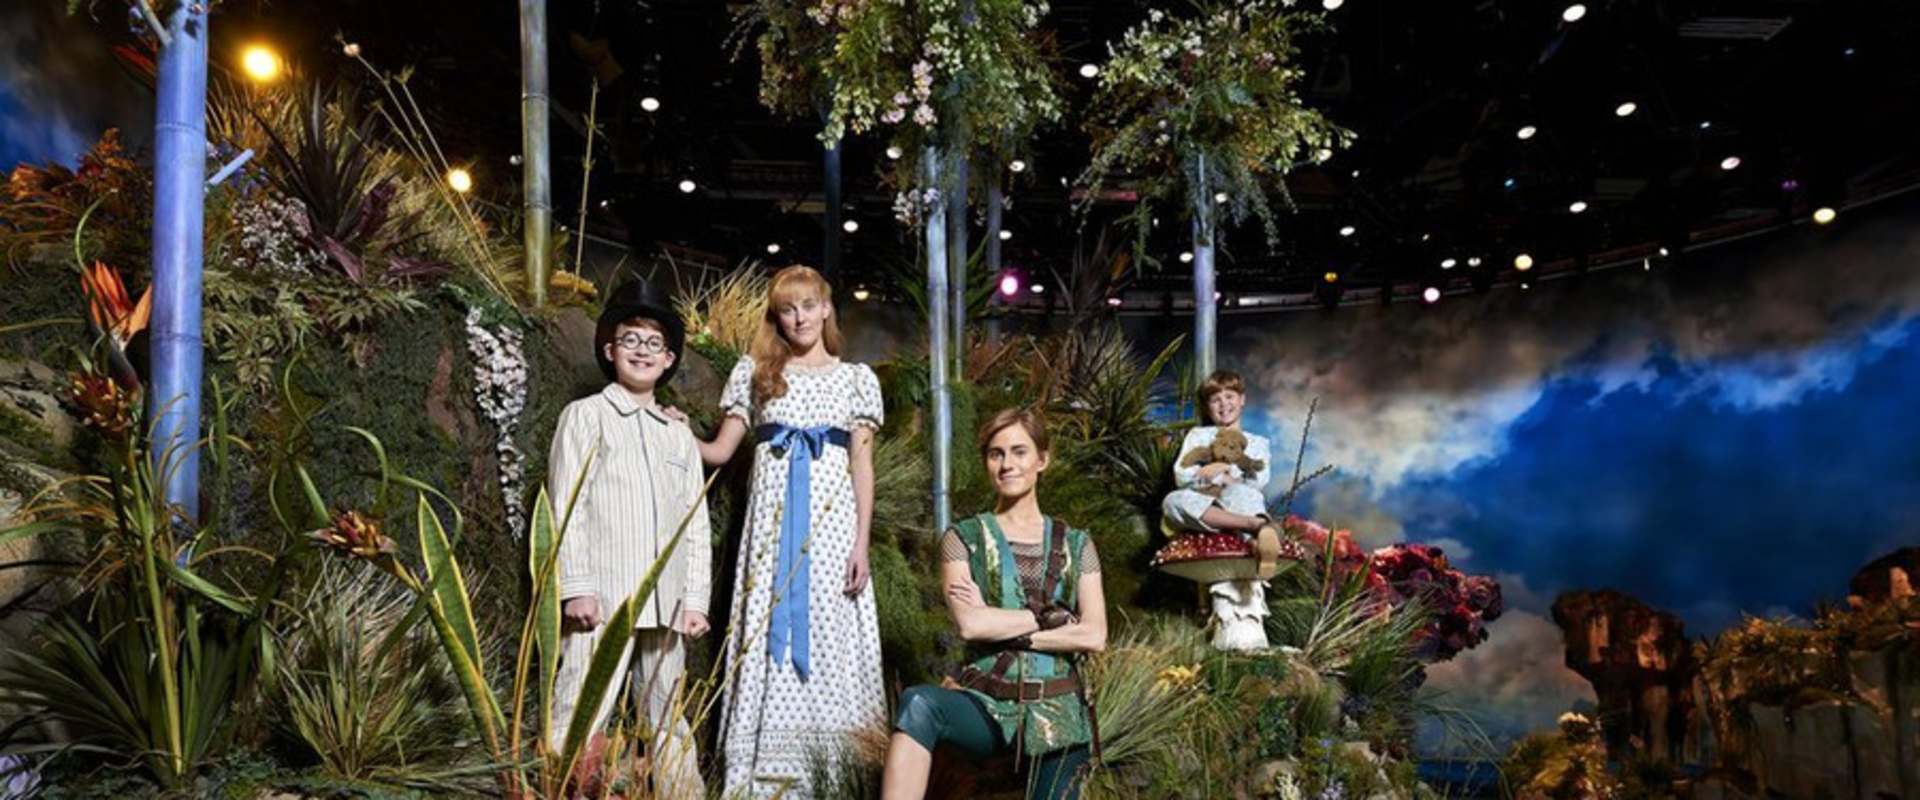 Peter Pan Live! background 2